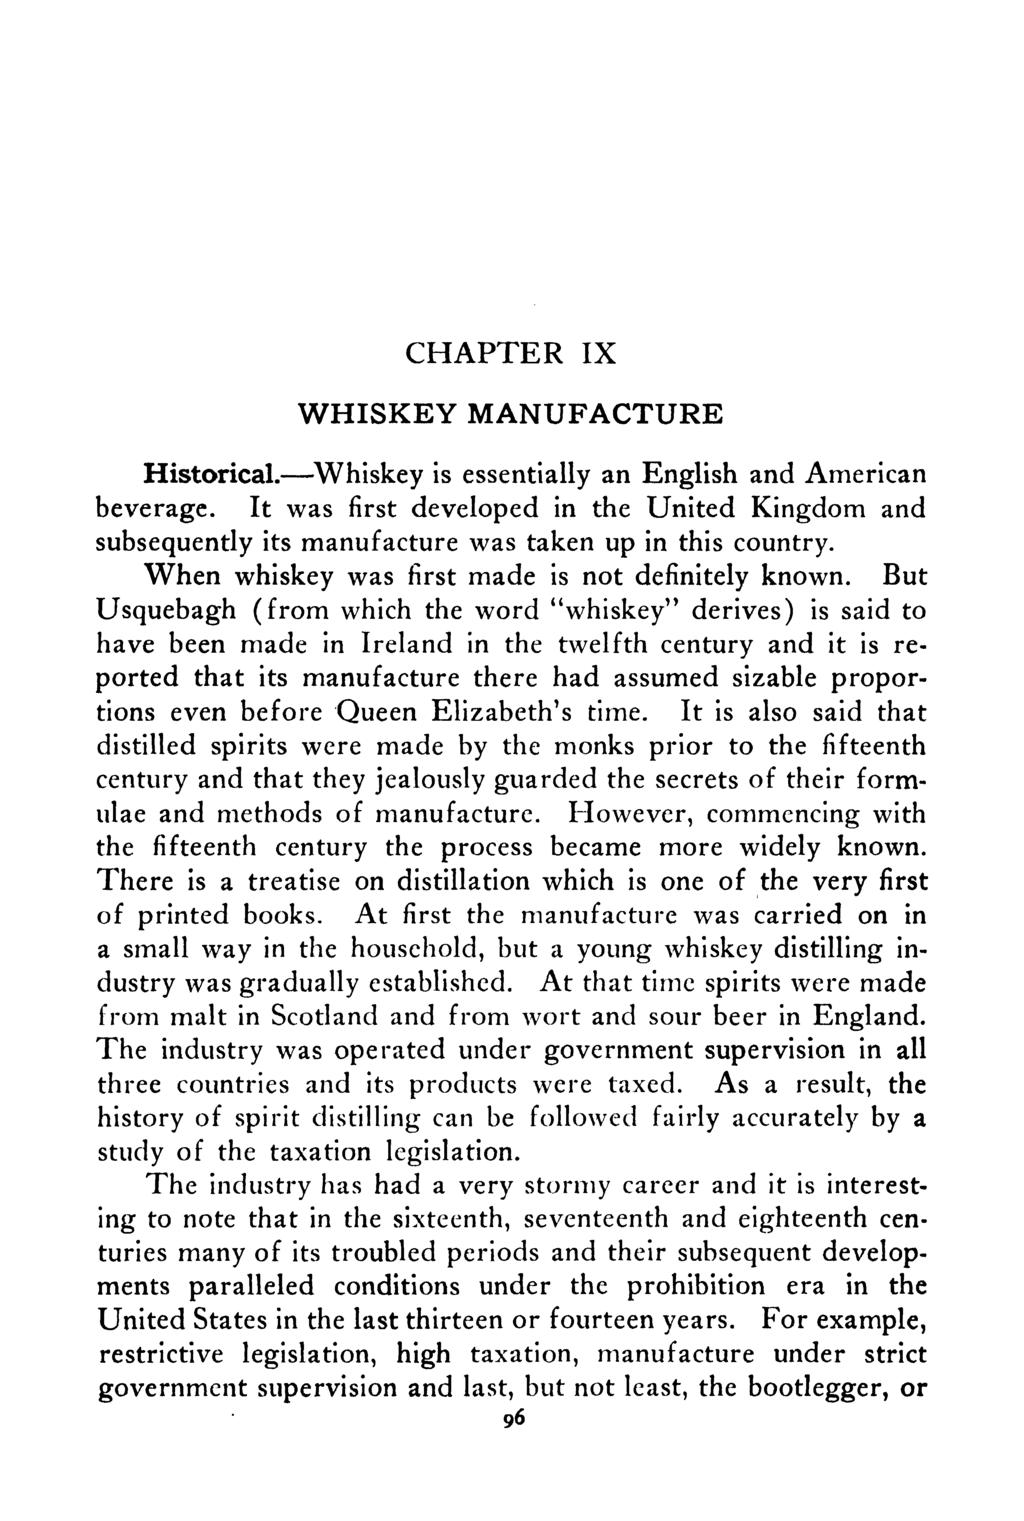 CHAPTER IX WHISKEY MANUFACTURE Historical. Whiskey is essentially an English and American beverage.